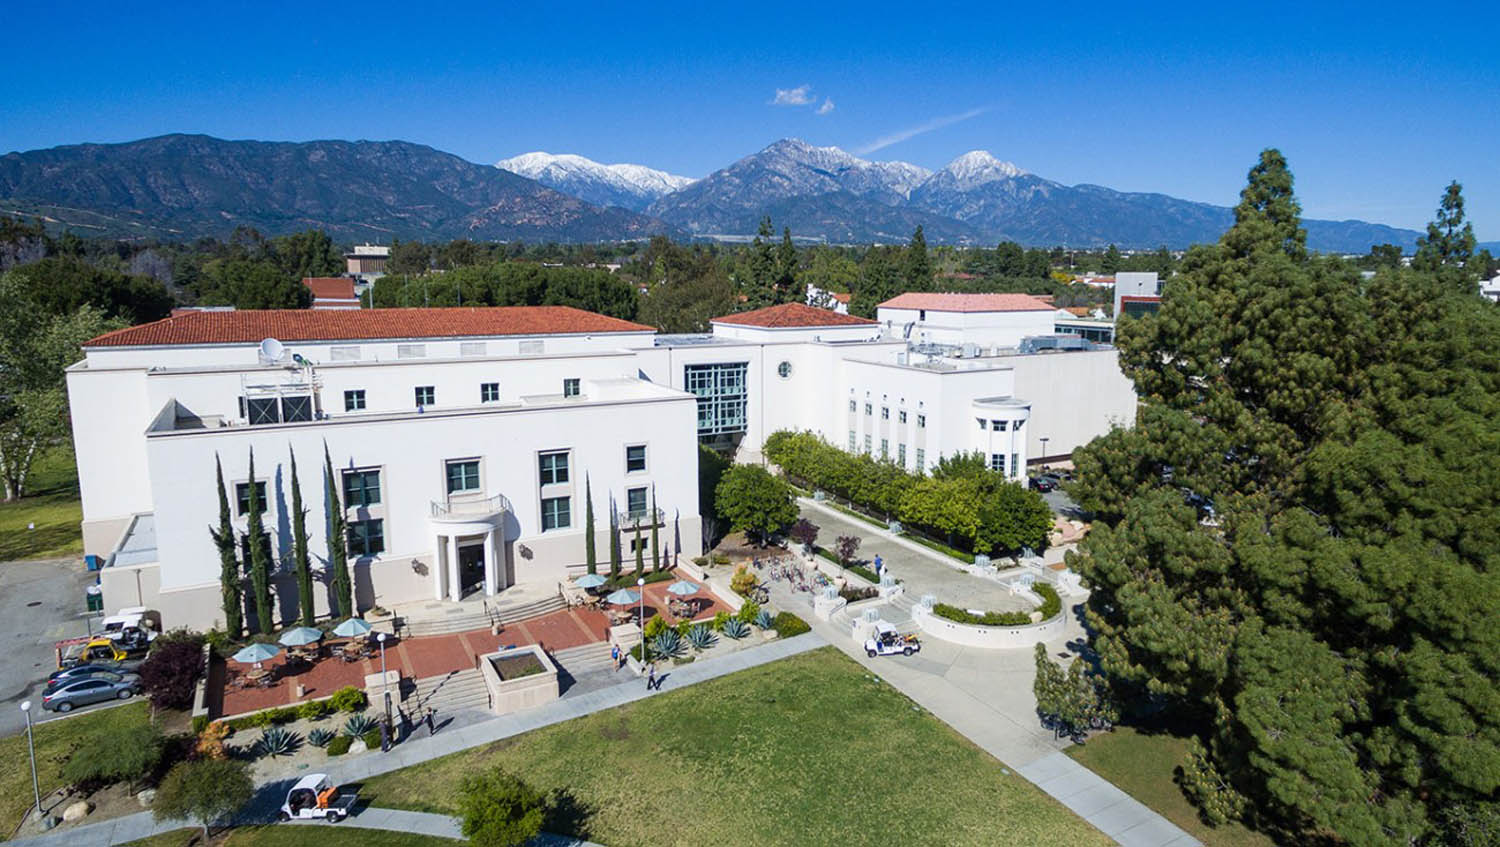 13-enigmatic-facts-about-the-claremont-colleges-library